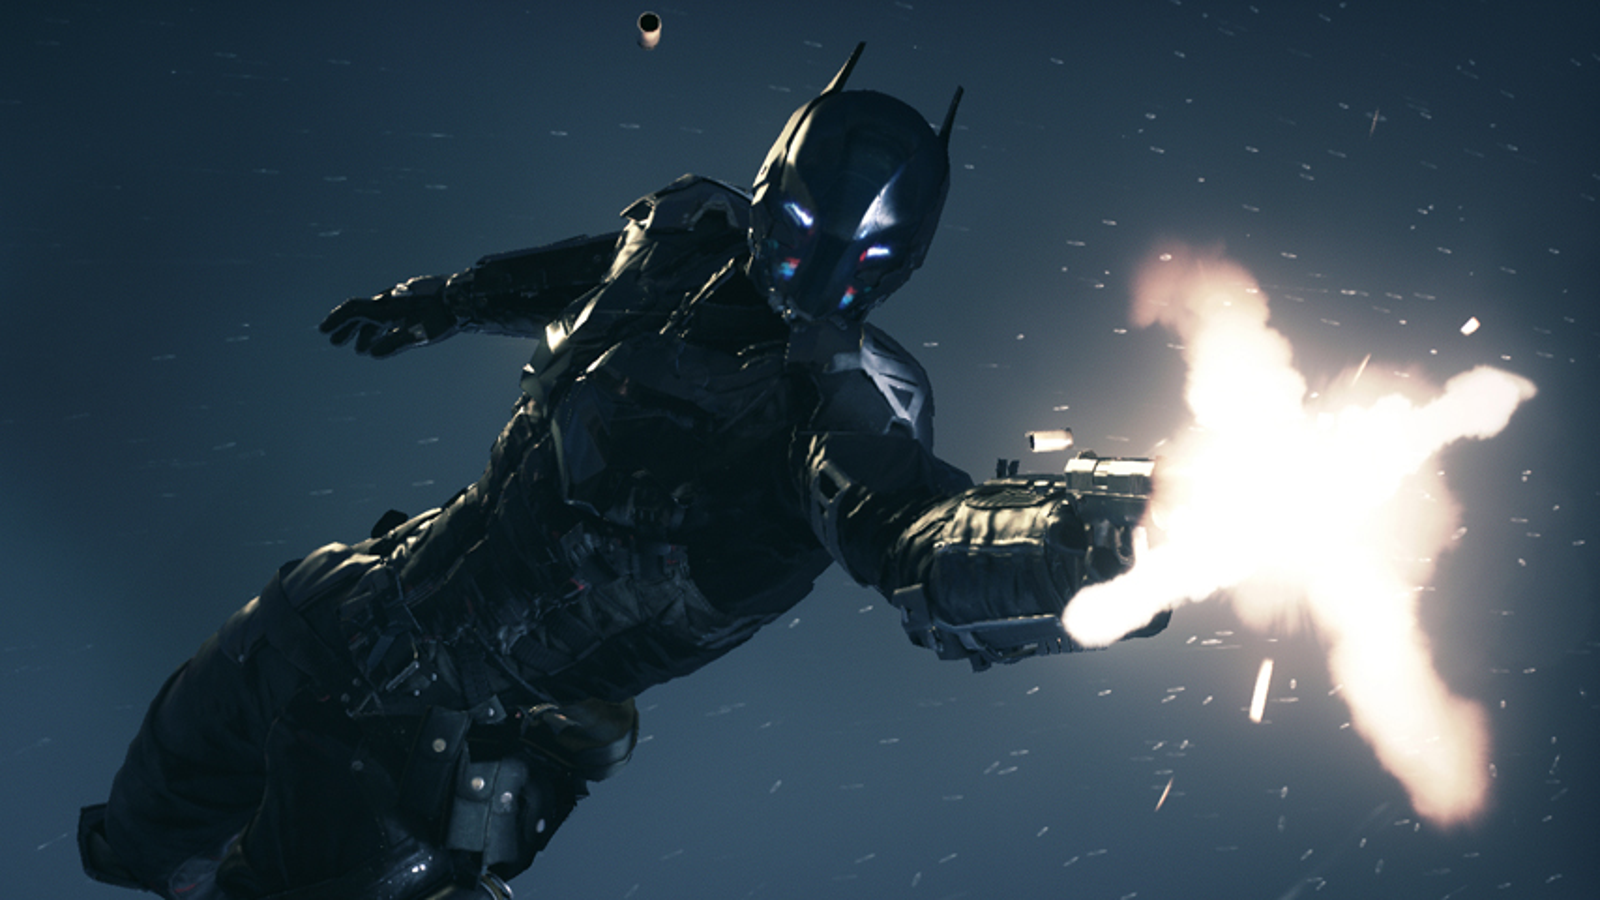 Batman: Arkham Knight lets you play as Robin, Nightwing, Catwoman - trailer  | VG247